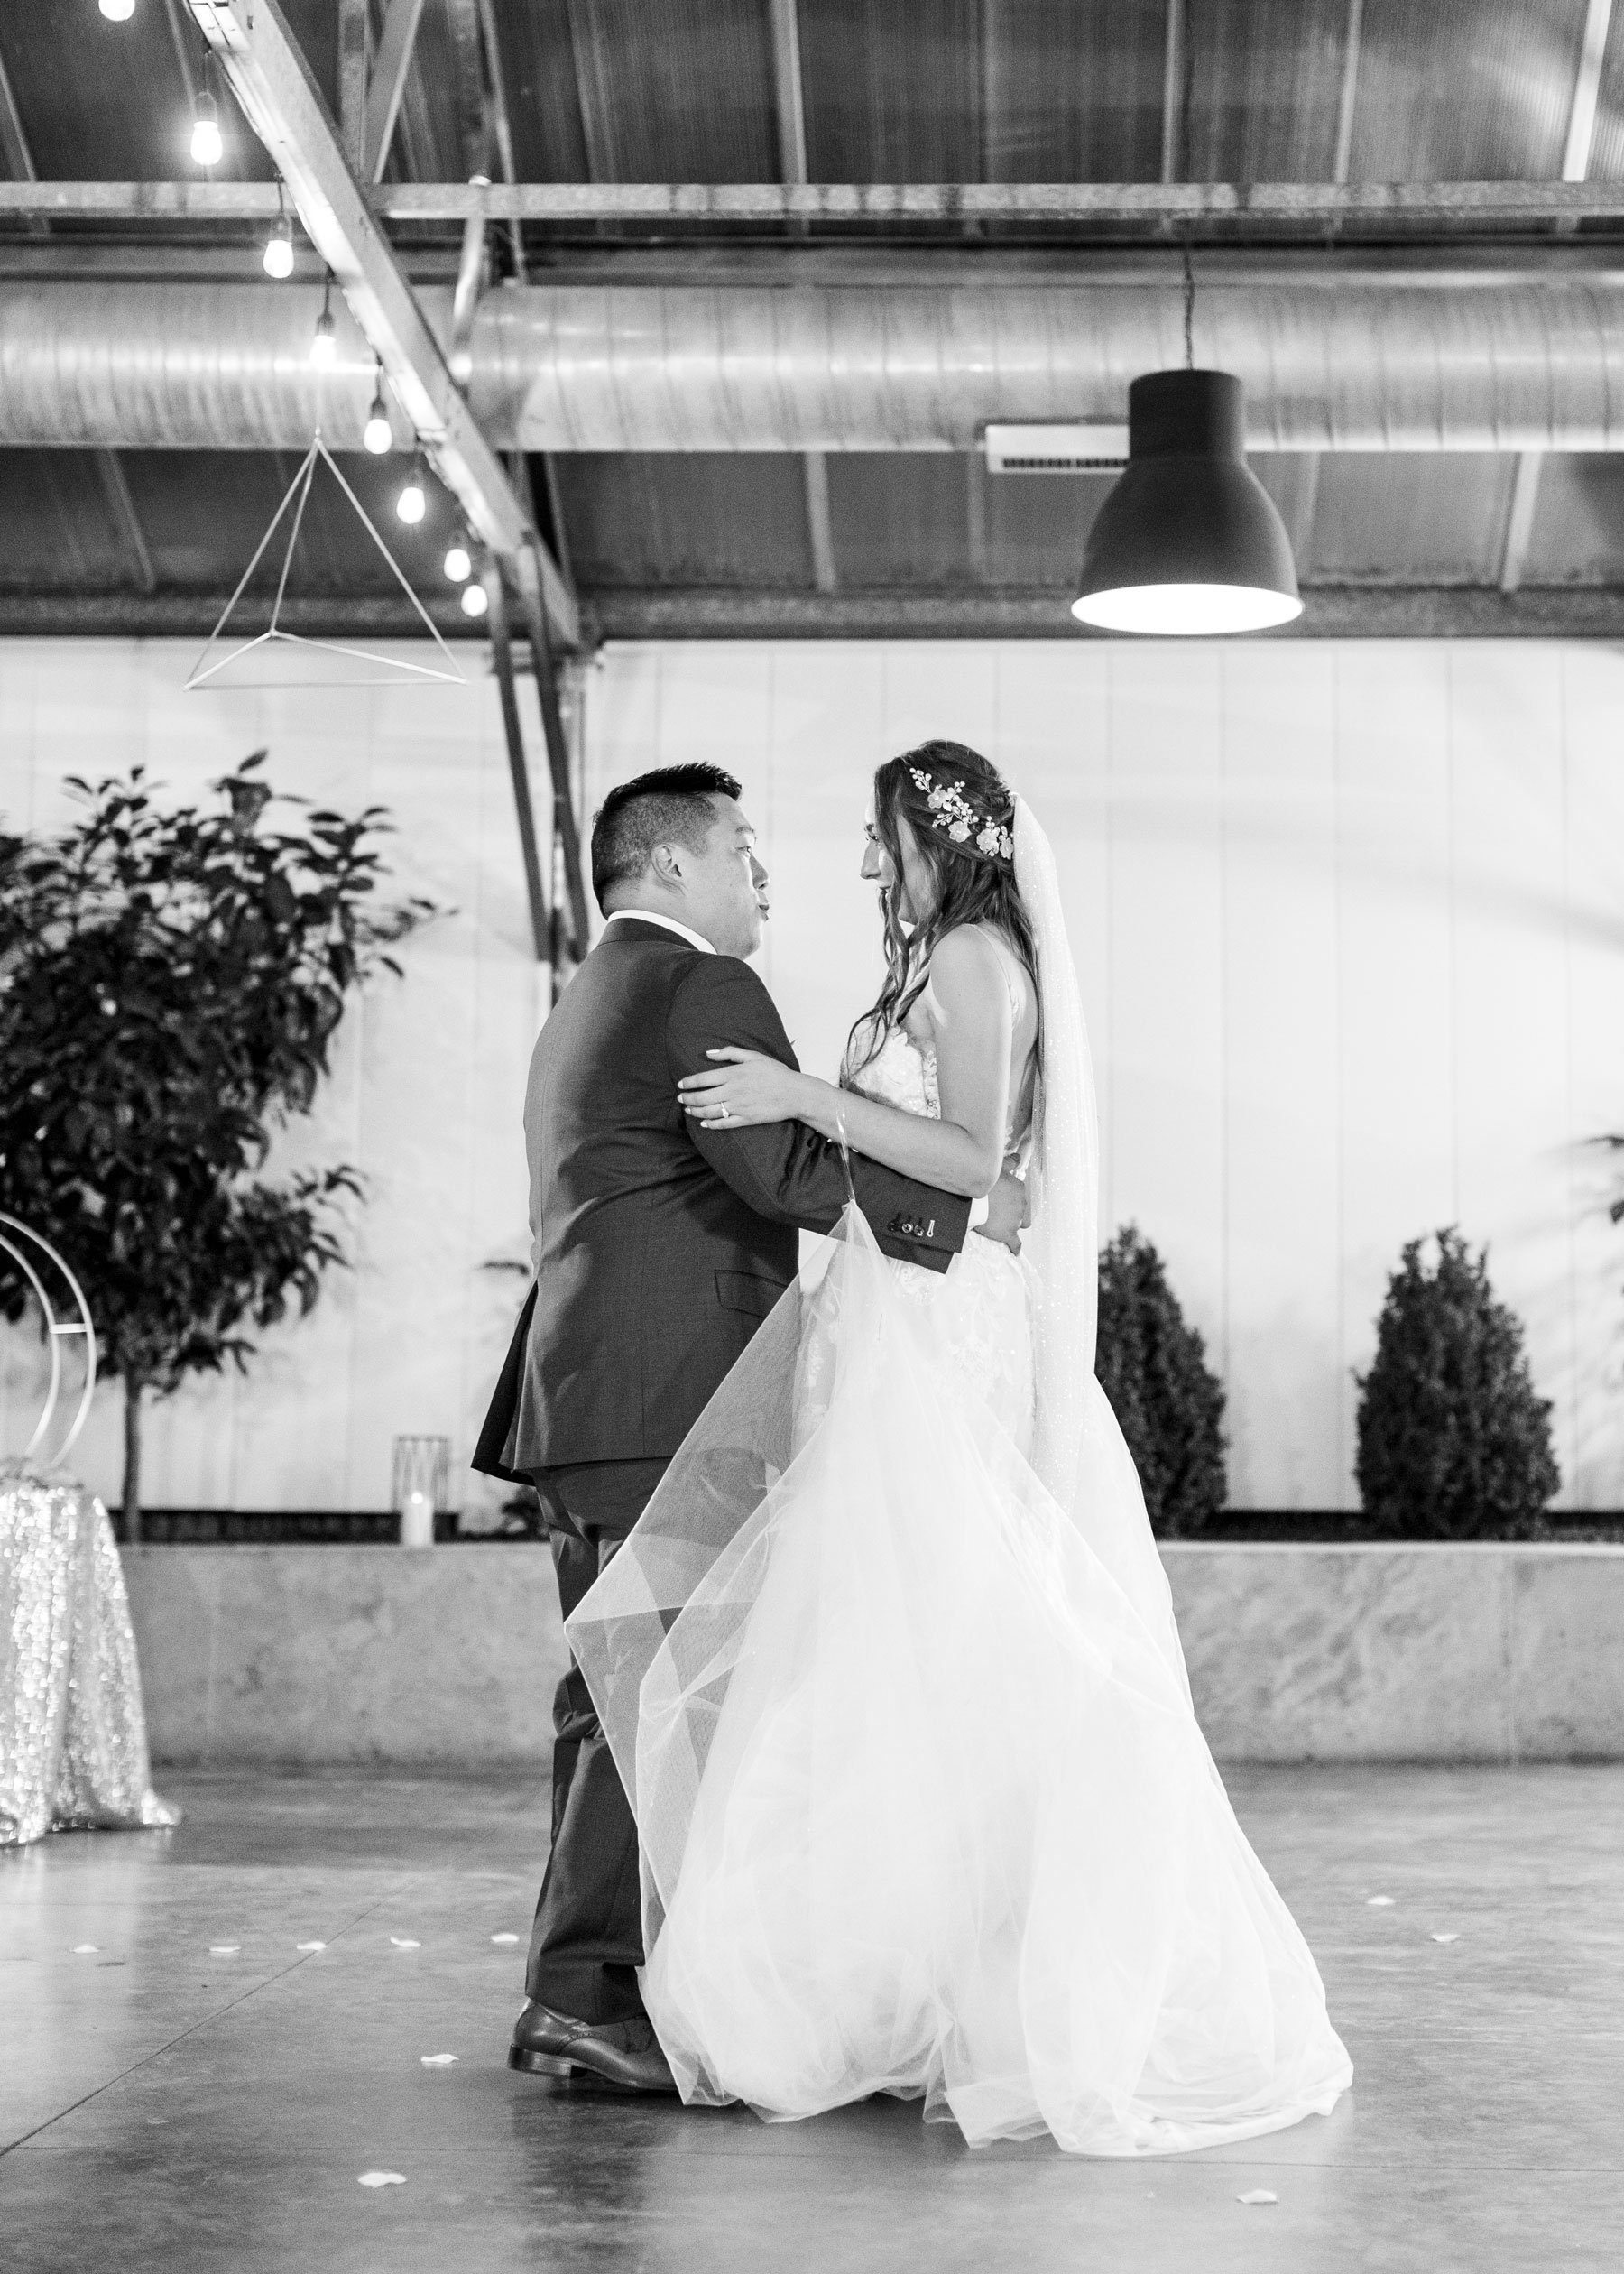  Professional Utah County wedding photographer Savanna Richardson Photography captures a bride and groom's first dance at Shade and Home Garden Center in Orem. first dance black and white wedding dance photos just married pictures #savannarichardsonp